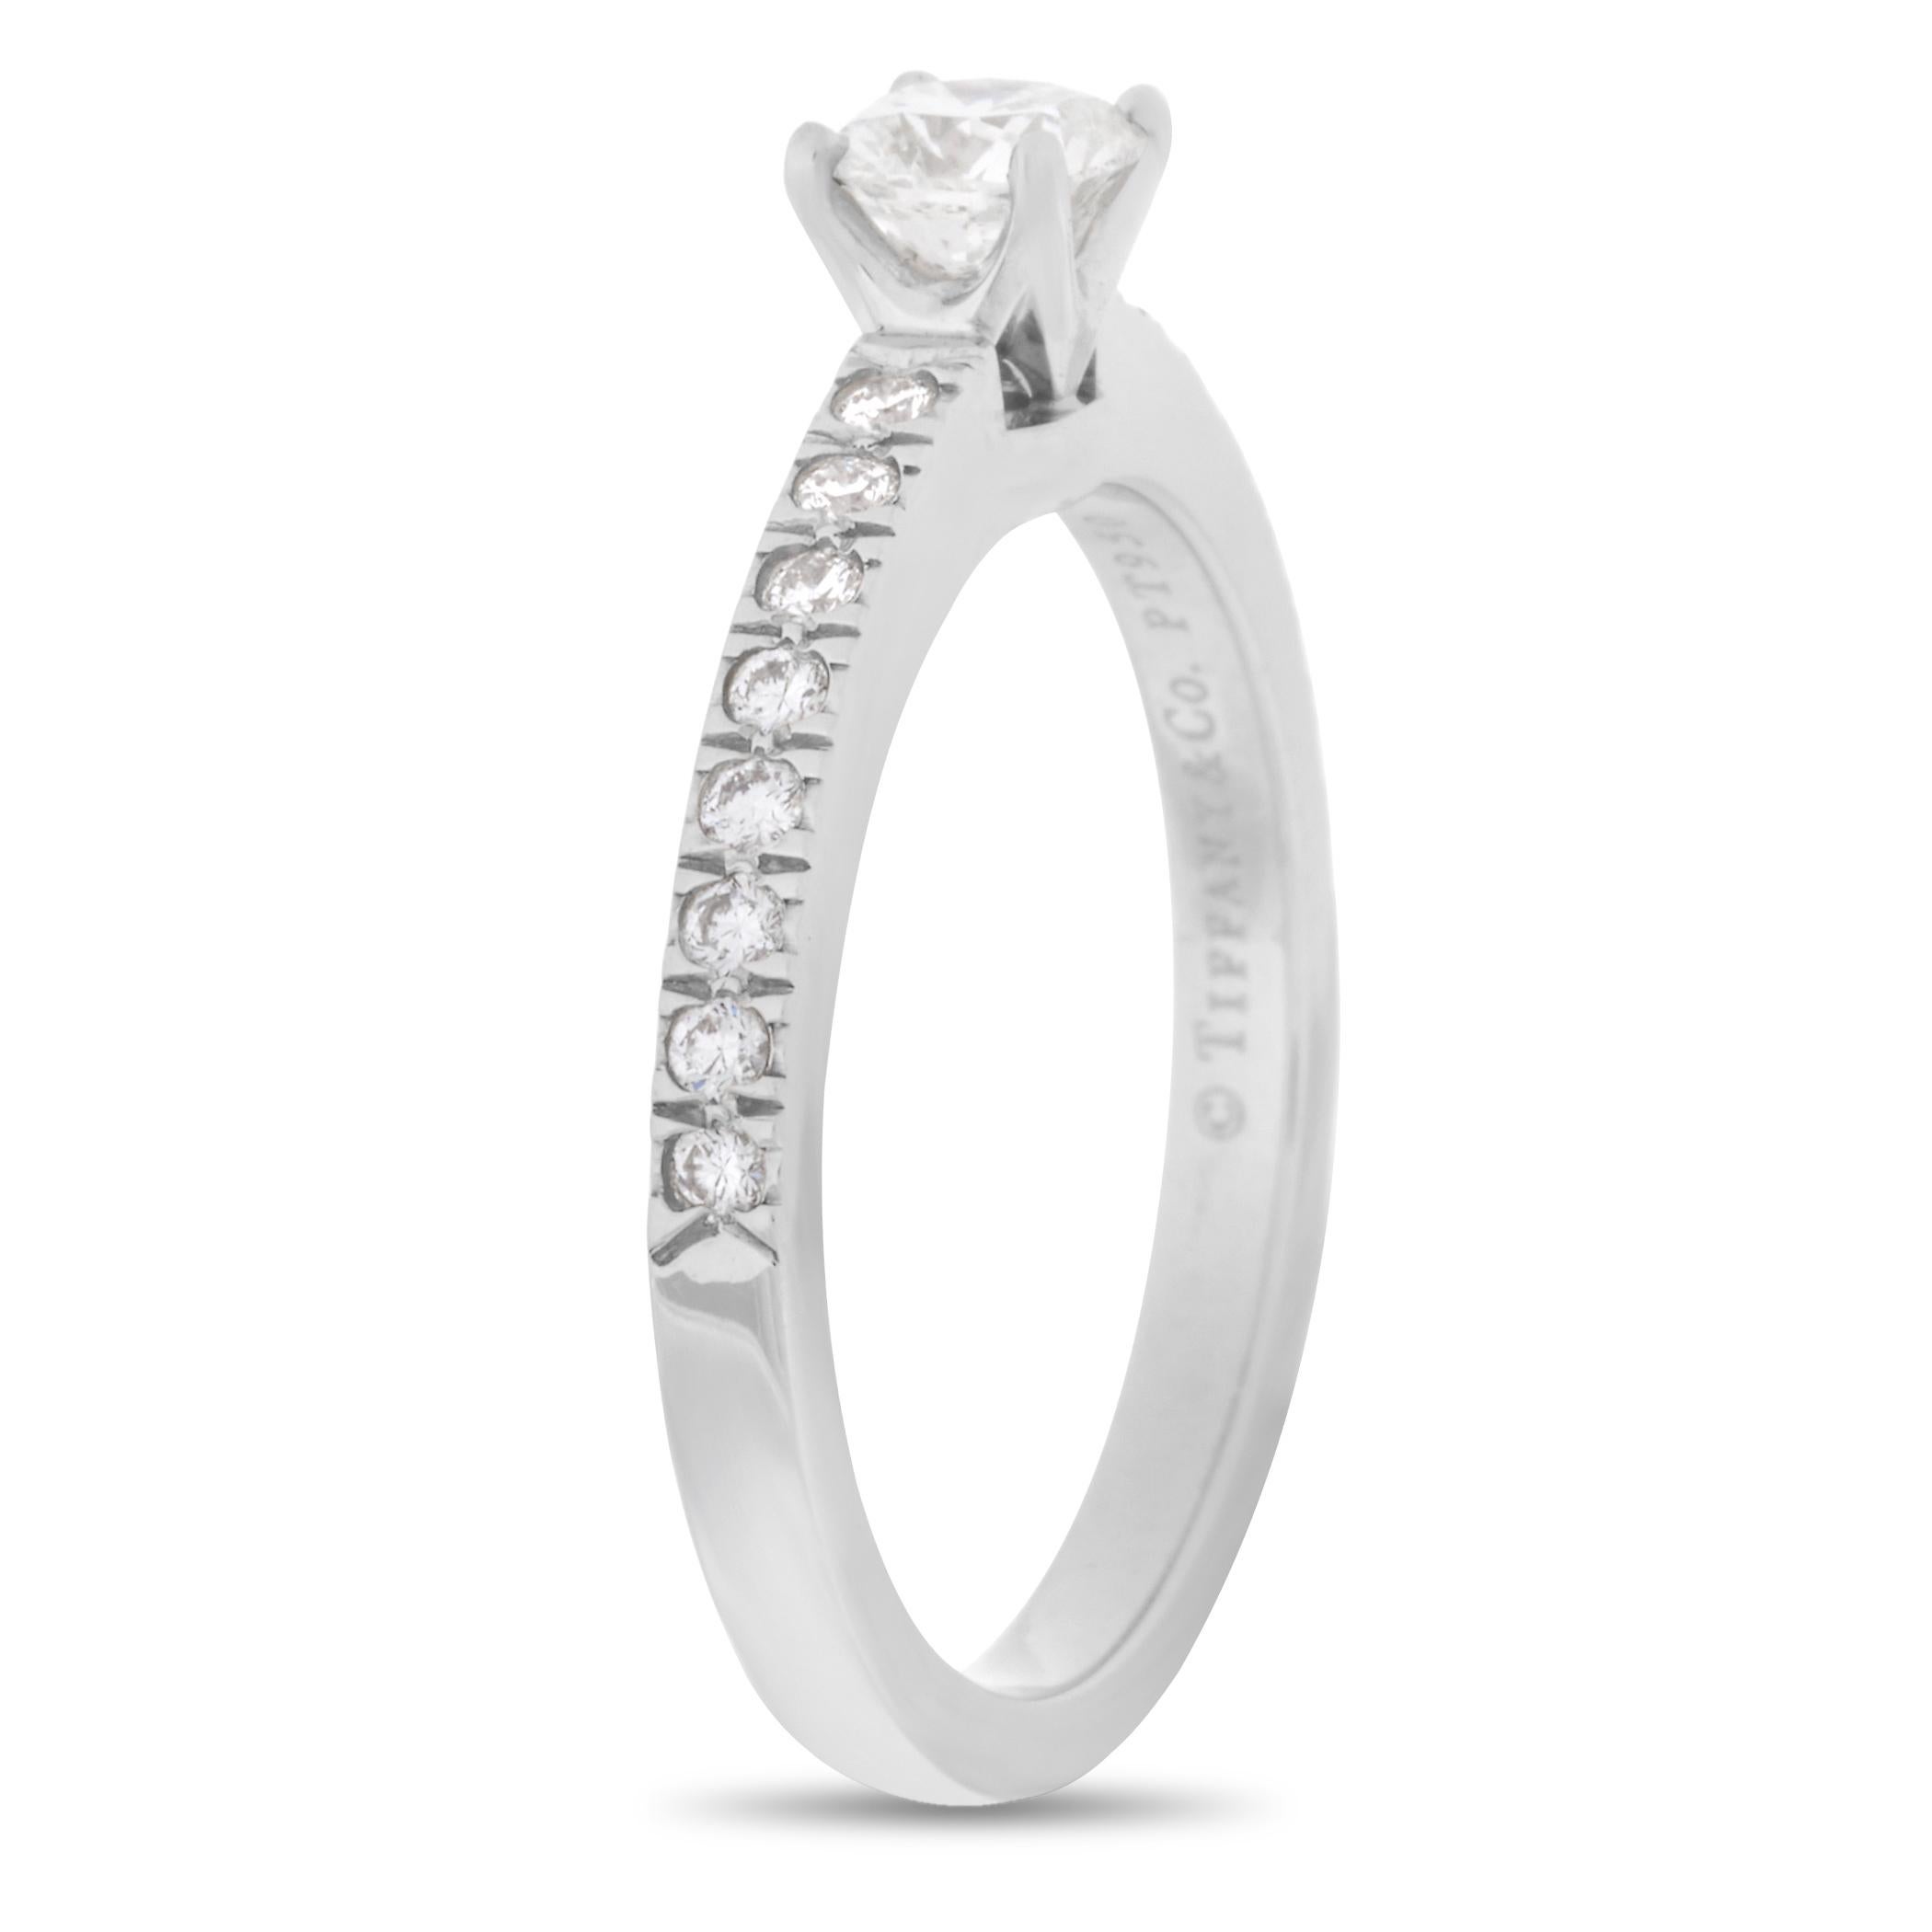 Embellished with a sparkling diamond stone of 0.32 carats in the center, G color VS1 clarity, and multiple diamonds on the band, this gorgeous platinum ring is made by Tiffany & Co. The ring weighs 4 grams and boasts band thickness of 2 mm.

This